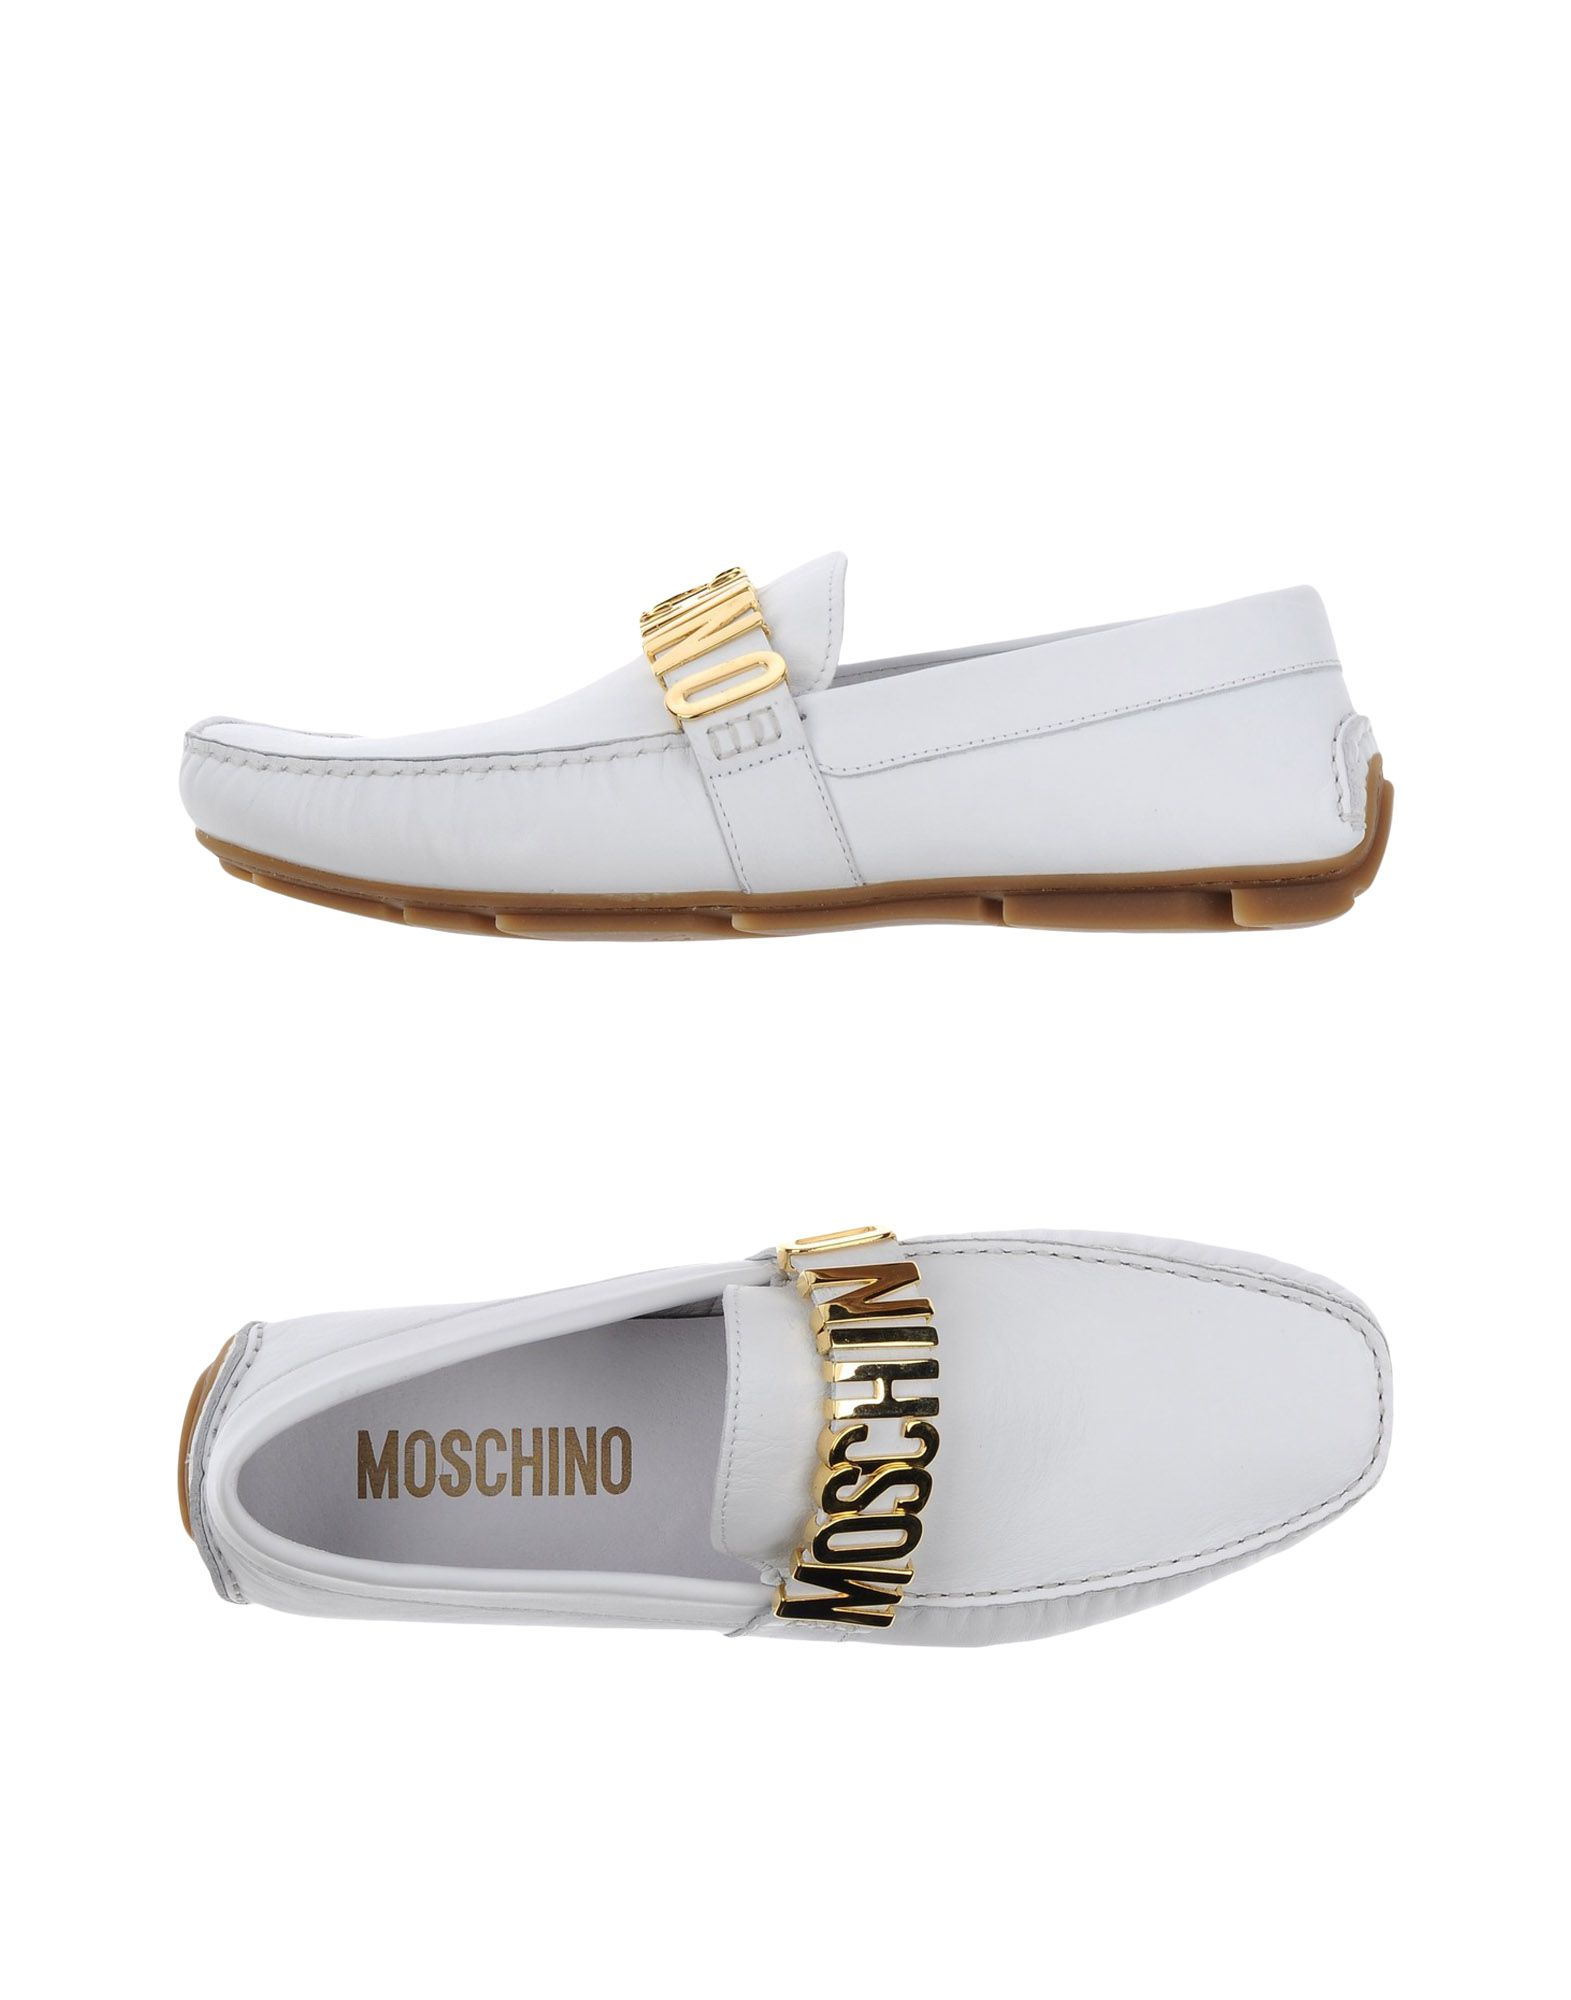 Moschino Moccasins in White for Men - Lyst